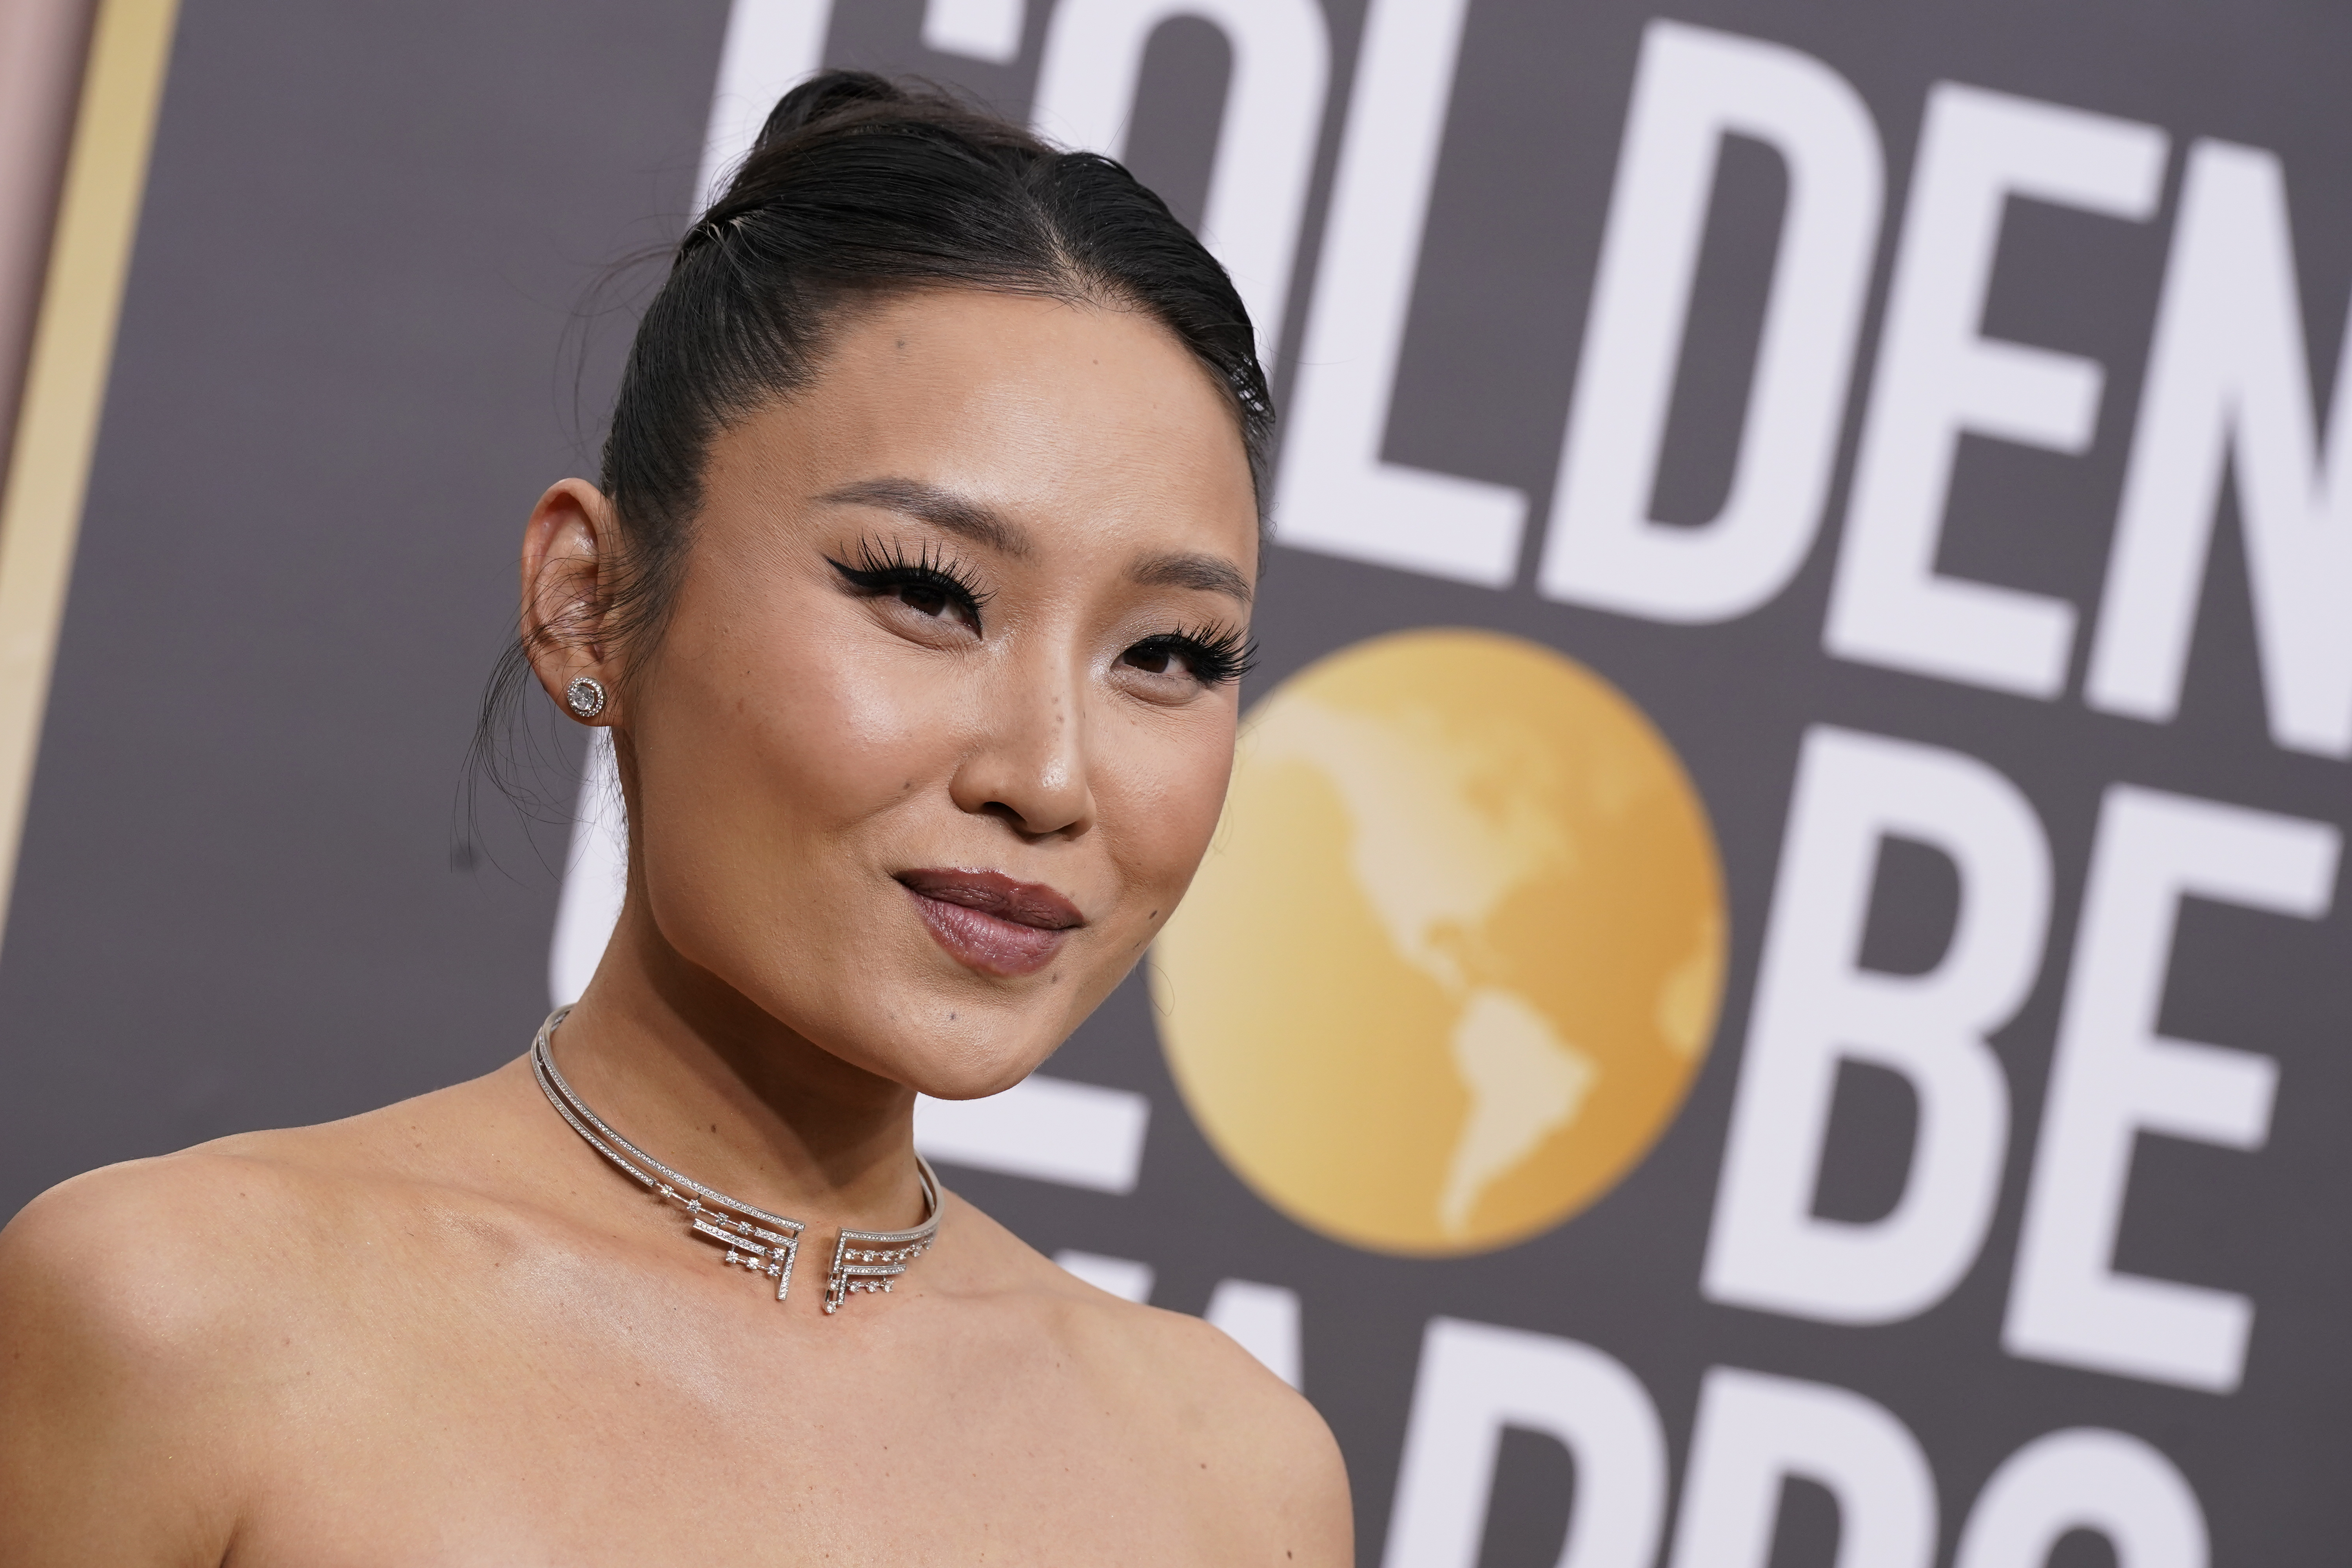 Li Jun Li arrives at the 80th annual Golden Globe Awards at the Beverly Hilton Hotel on Tuesday, Jan. 10, 2023, in Beverly Hills, Calif. (Photo by Jordan Strauss/Invision/AP)